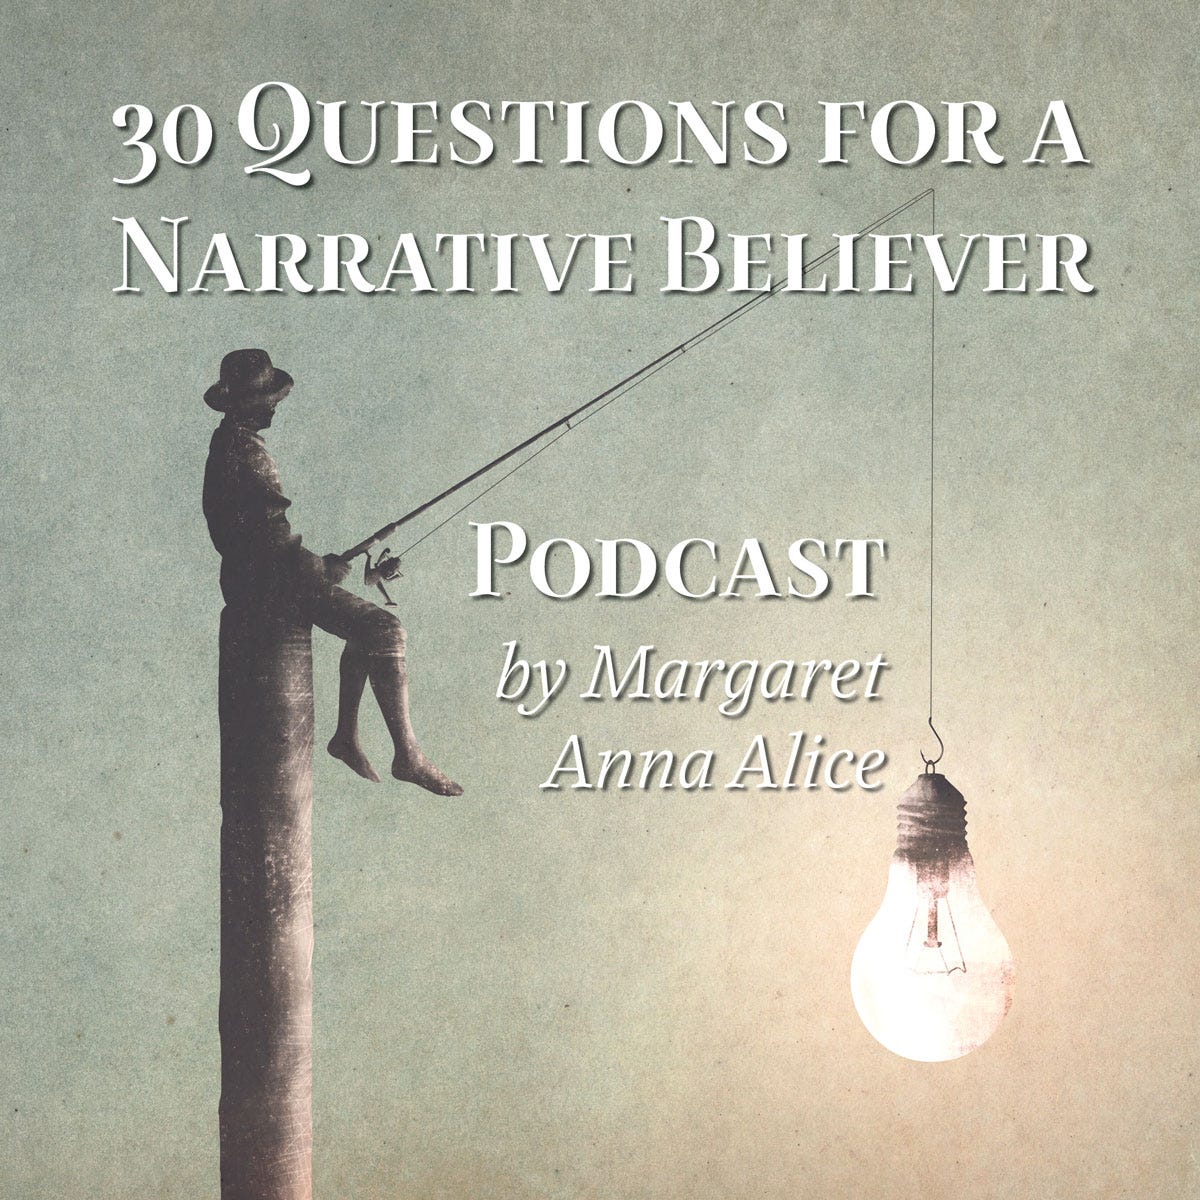 30 Questions for a Narrative Believer (Podcast)